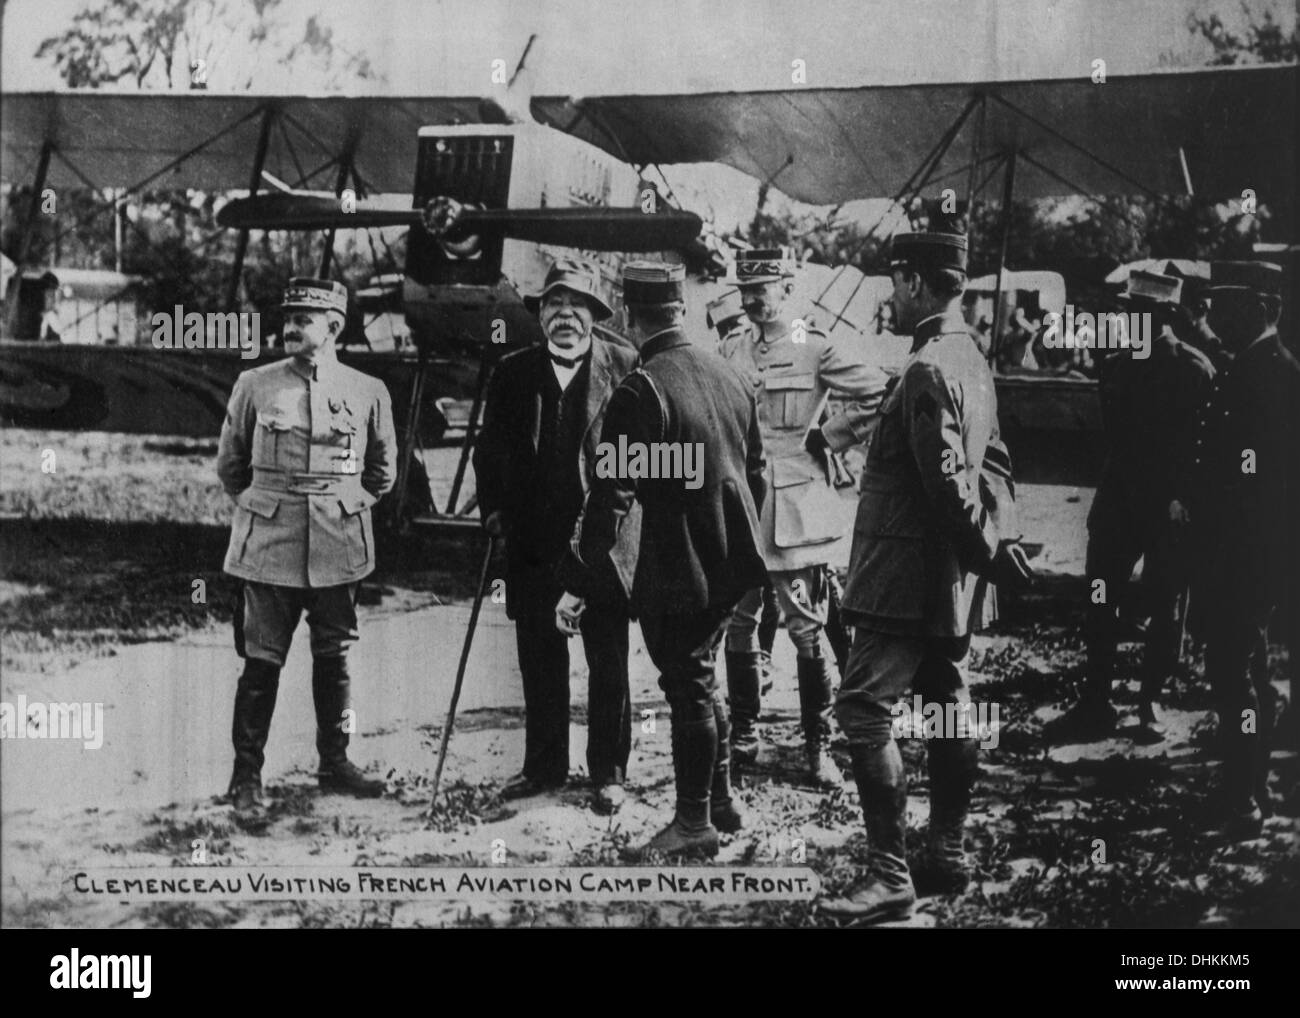 French Prime Minister Georges Clemenceau with Military Officers During Visit to French Aviation Camp, World War I, 1917 Stock Photo